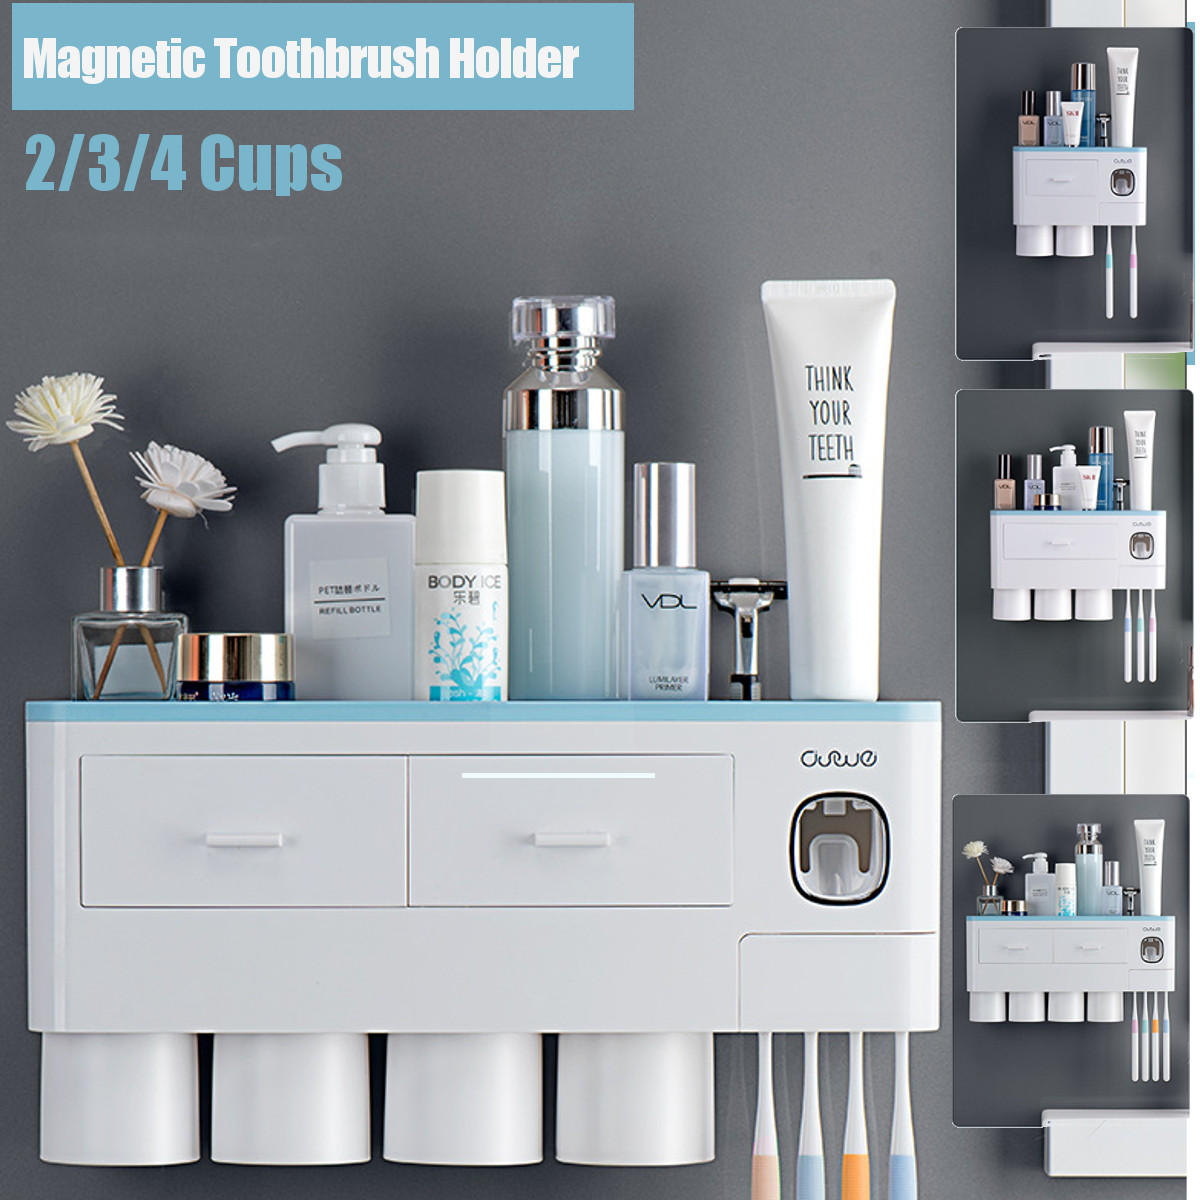 Toothbrush-Holder-Automatic-Toothpaste-Dispenser-With-Cup-Wall-Mount-Toiletries-Storage-Rack-Bathroo-1755230-1